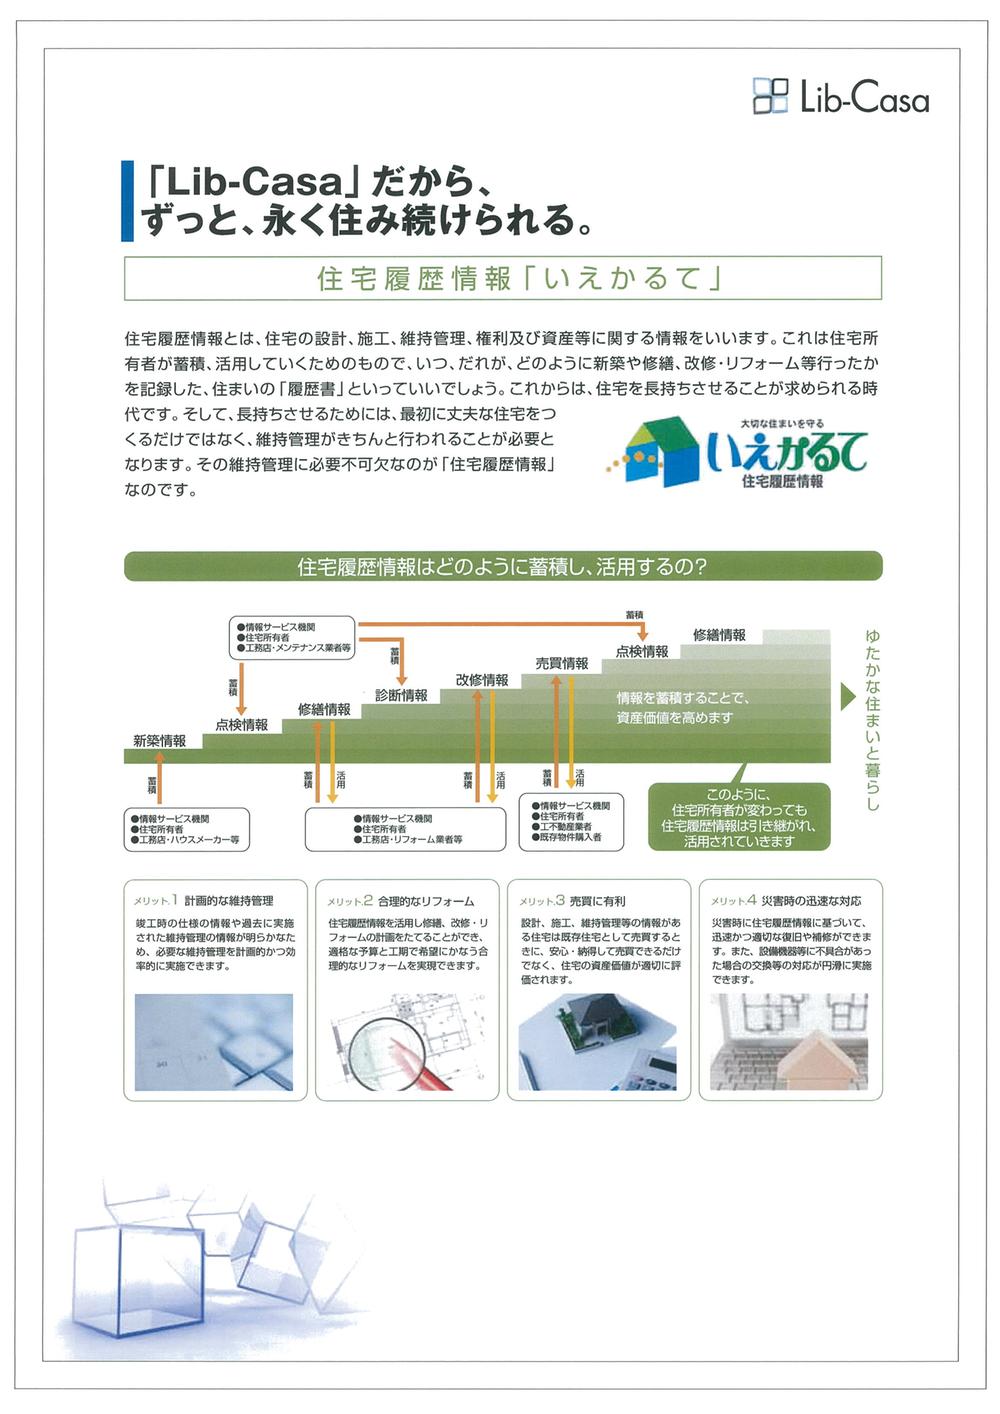 Construction ・ Construction method ・ specification. System to leave the history information of the house is available.